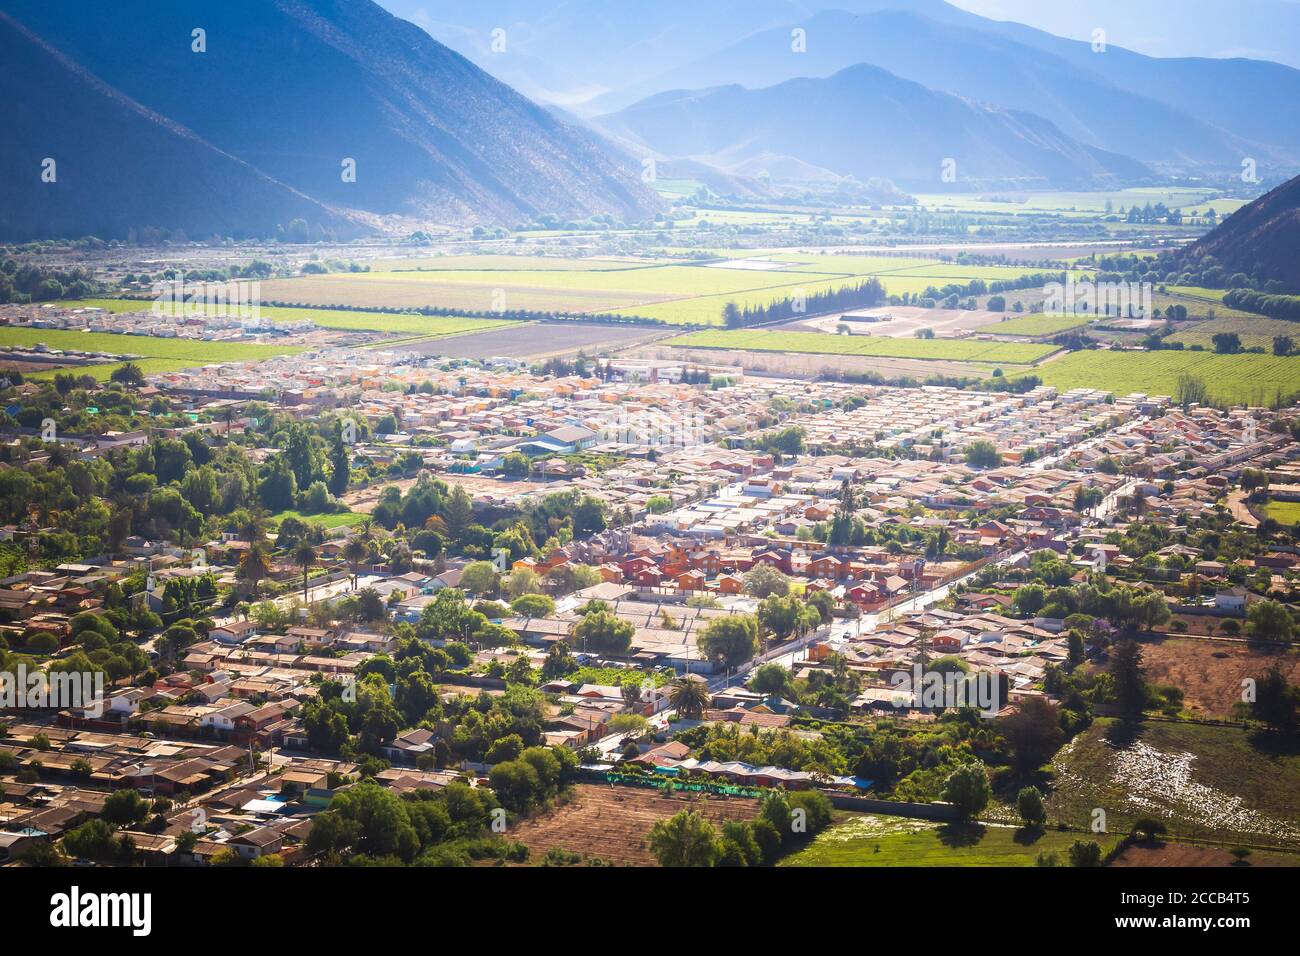 Aerial view of Vicuña surrounded by mountains, Chile Stock Photo